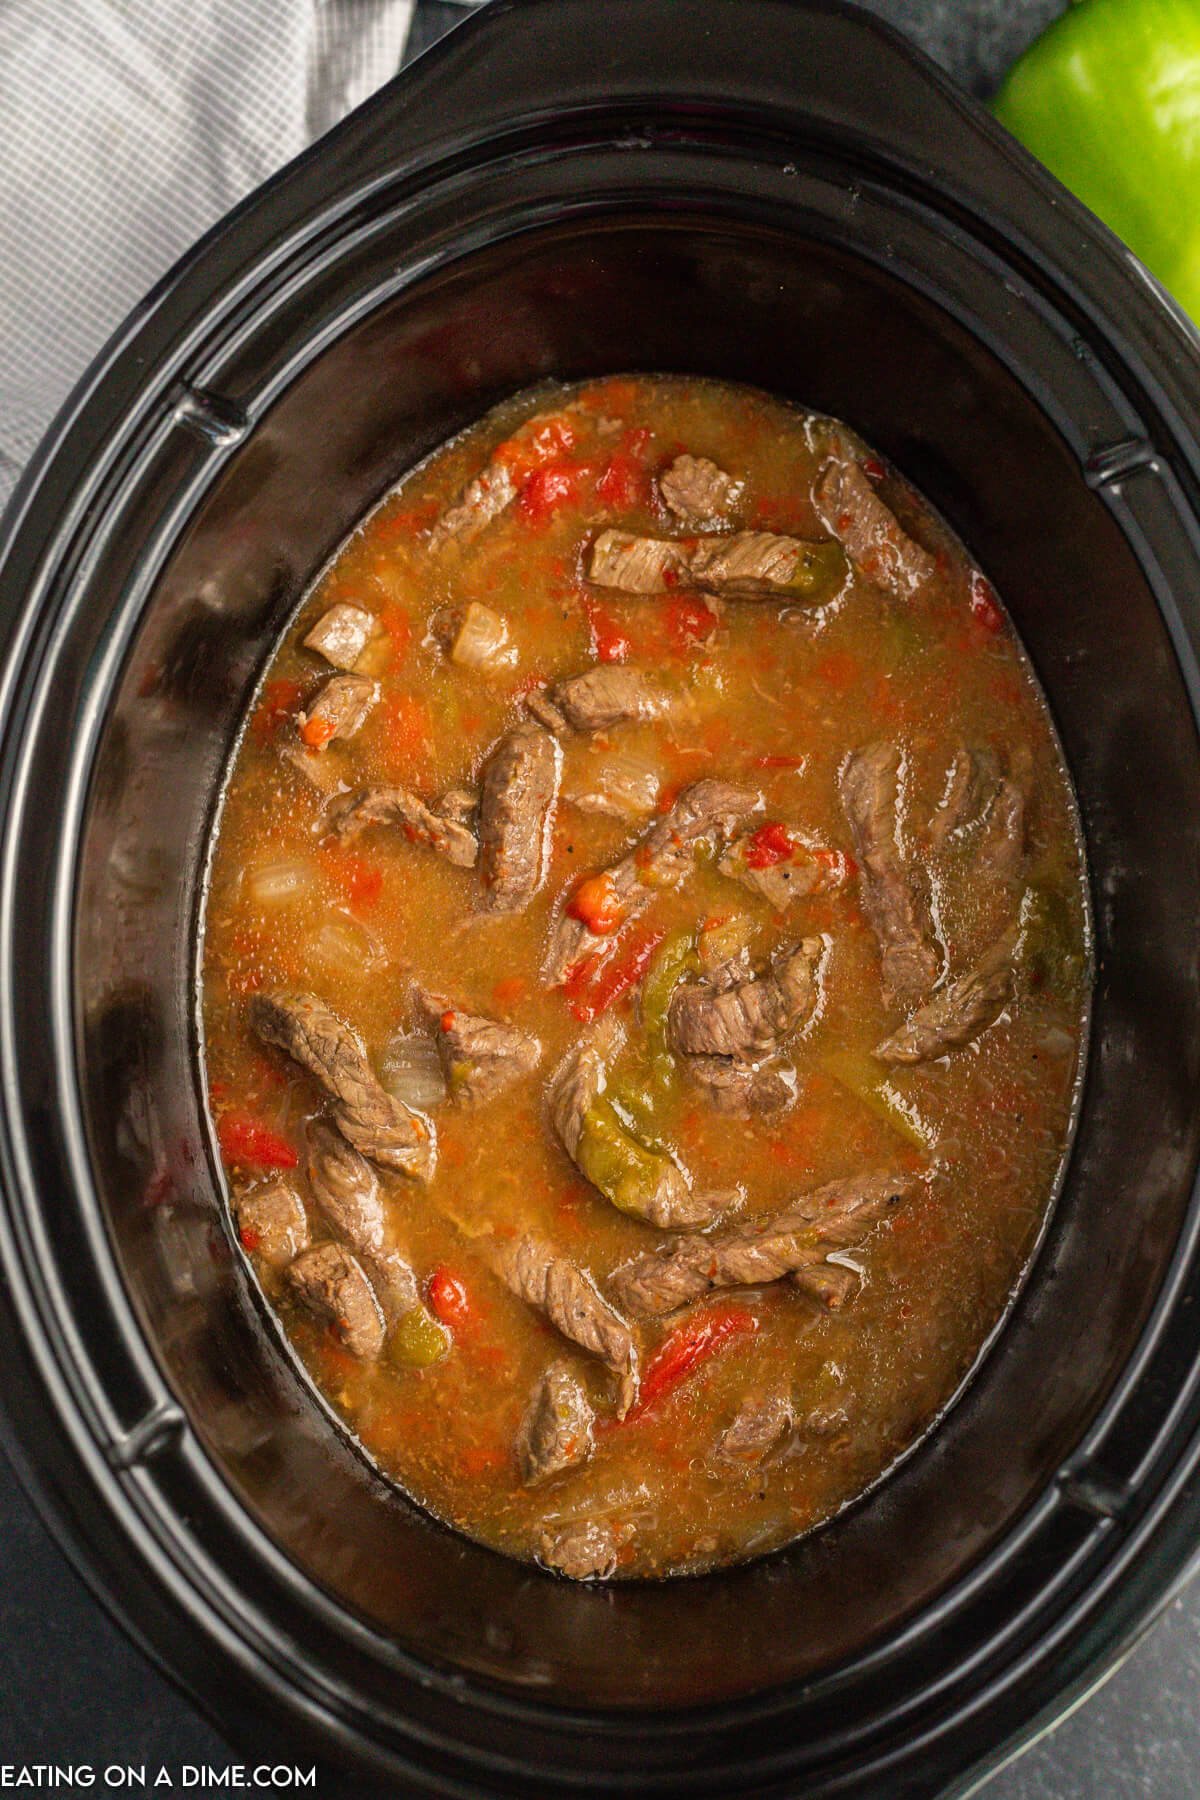 The sauce is in the crock pot thickened and mixed into the beef, peppers and onions.  